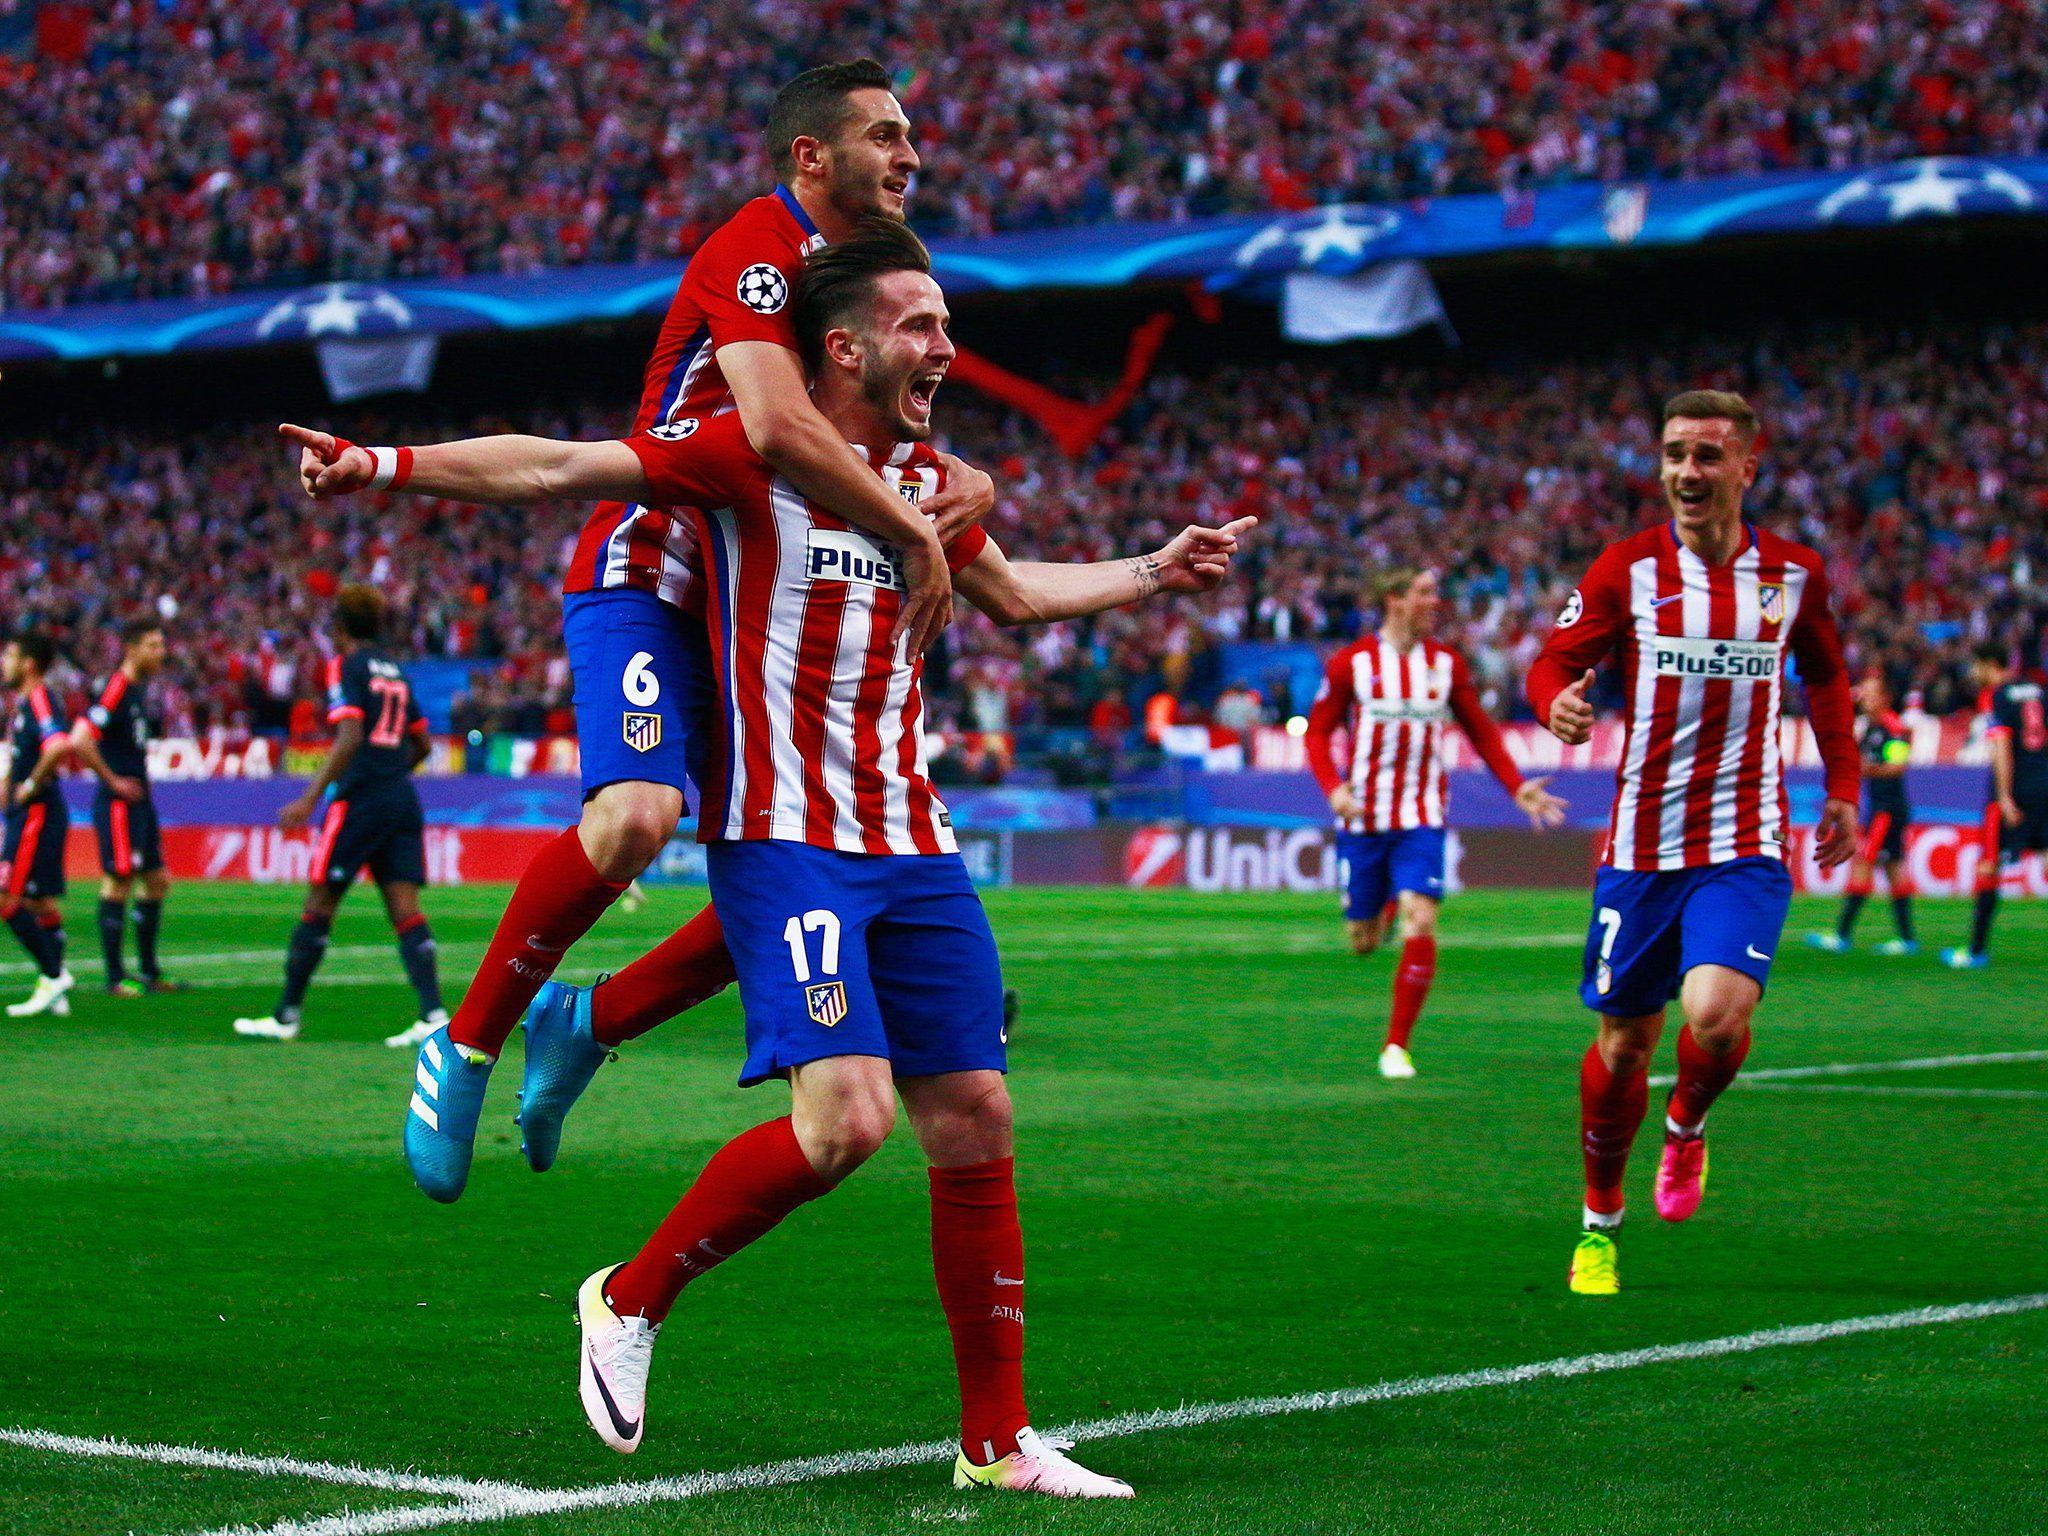 Saul Niguez goal video: Manchester United target scores 'goal of the